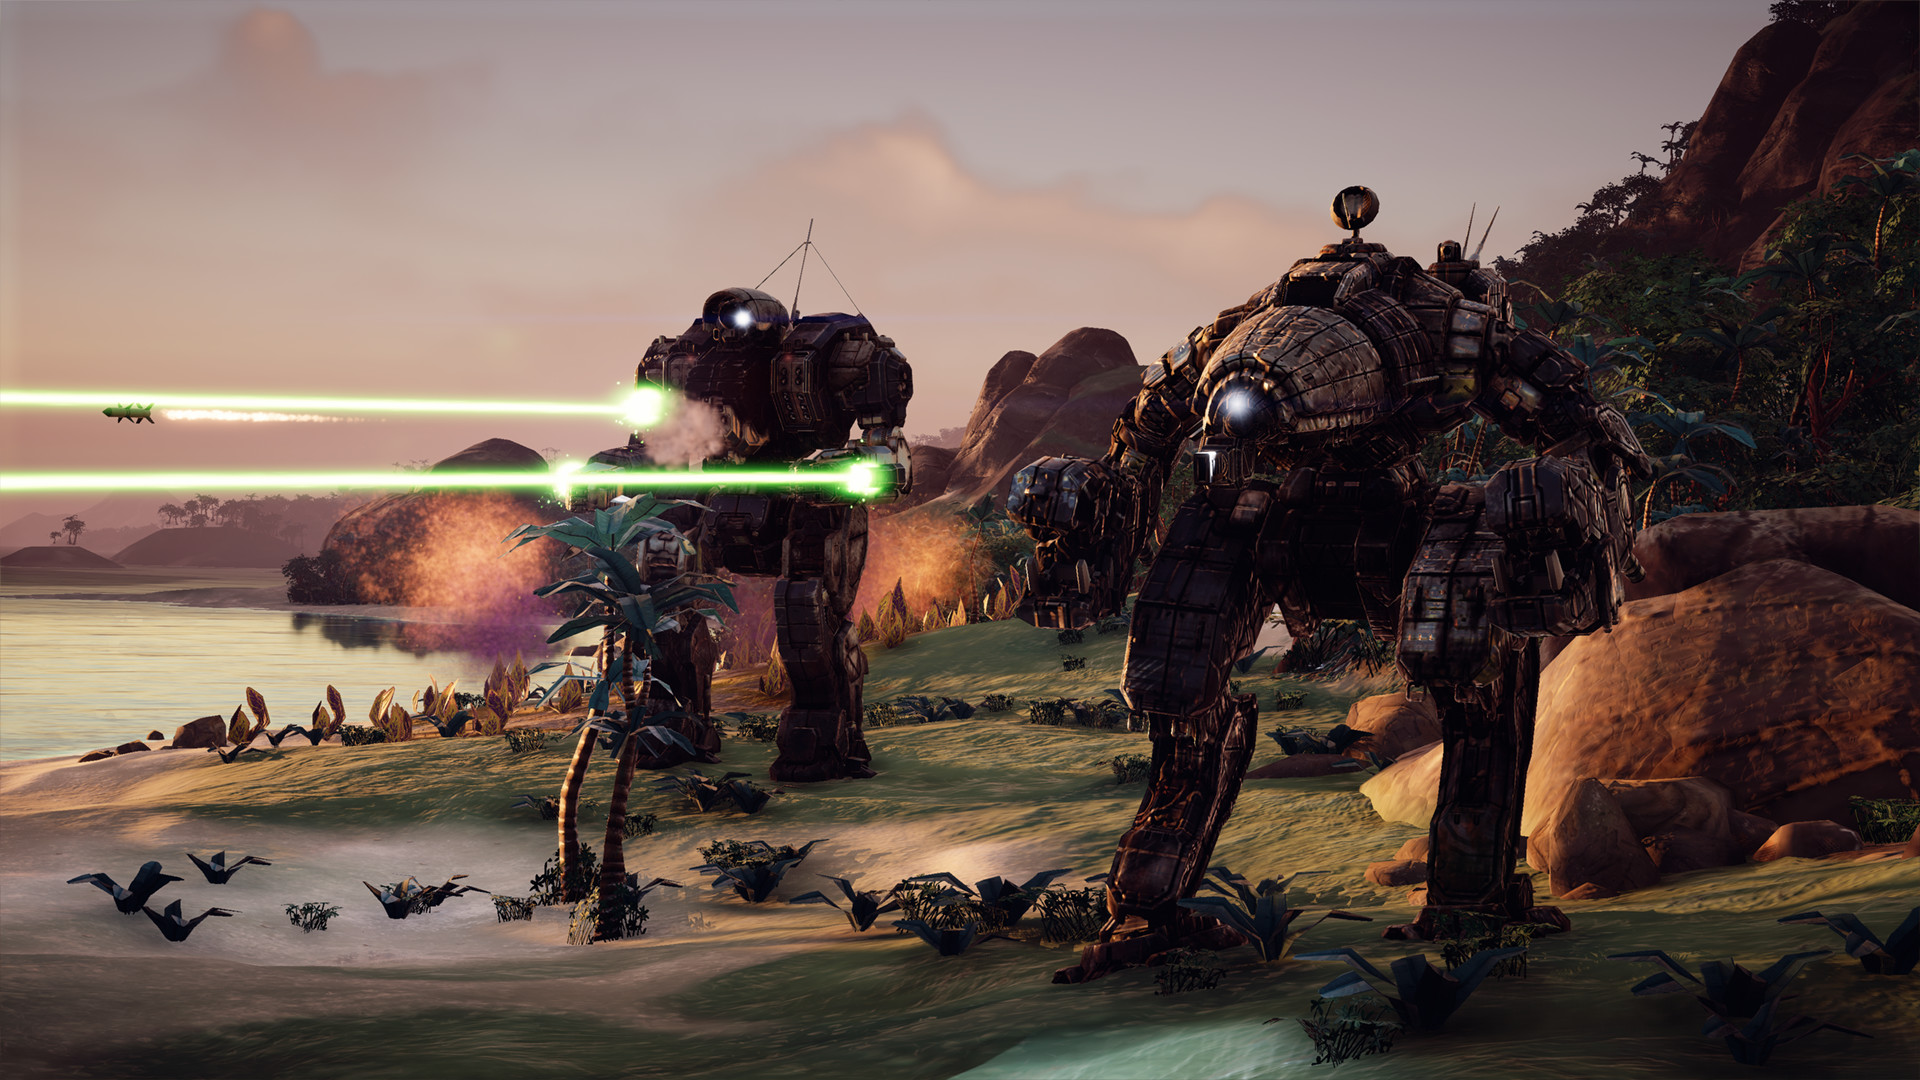 New “Flashpoint ” Expansion for BattleTech Launches November 27, Adds 30 Hours of Gameplay